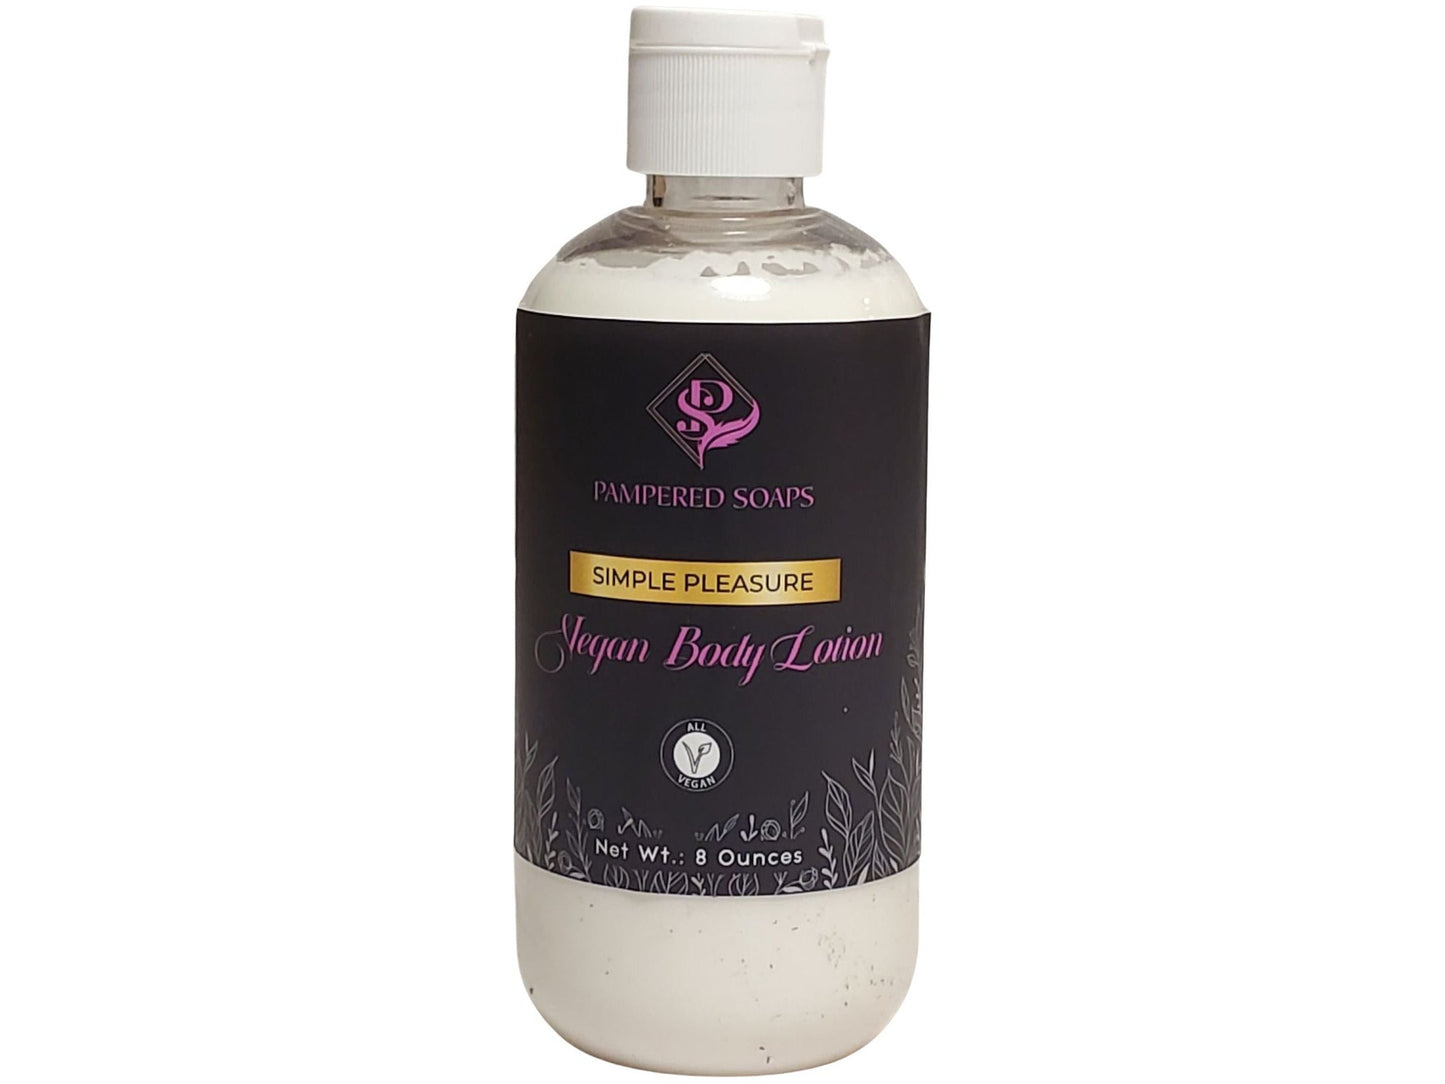 Simple Pleasures Body Lotion Pampered Soaps